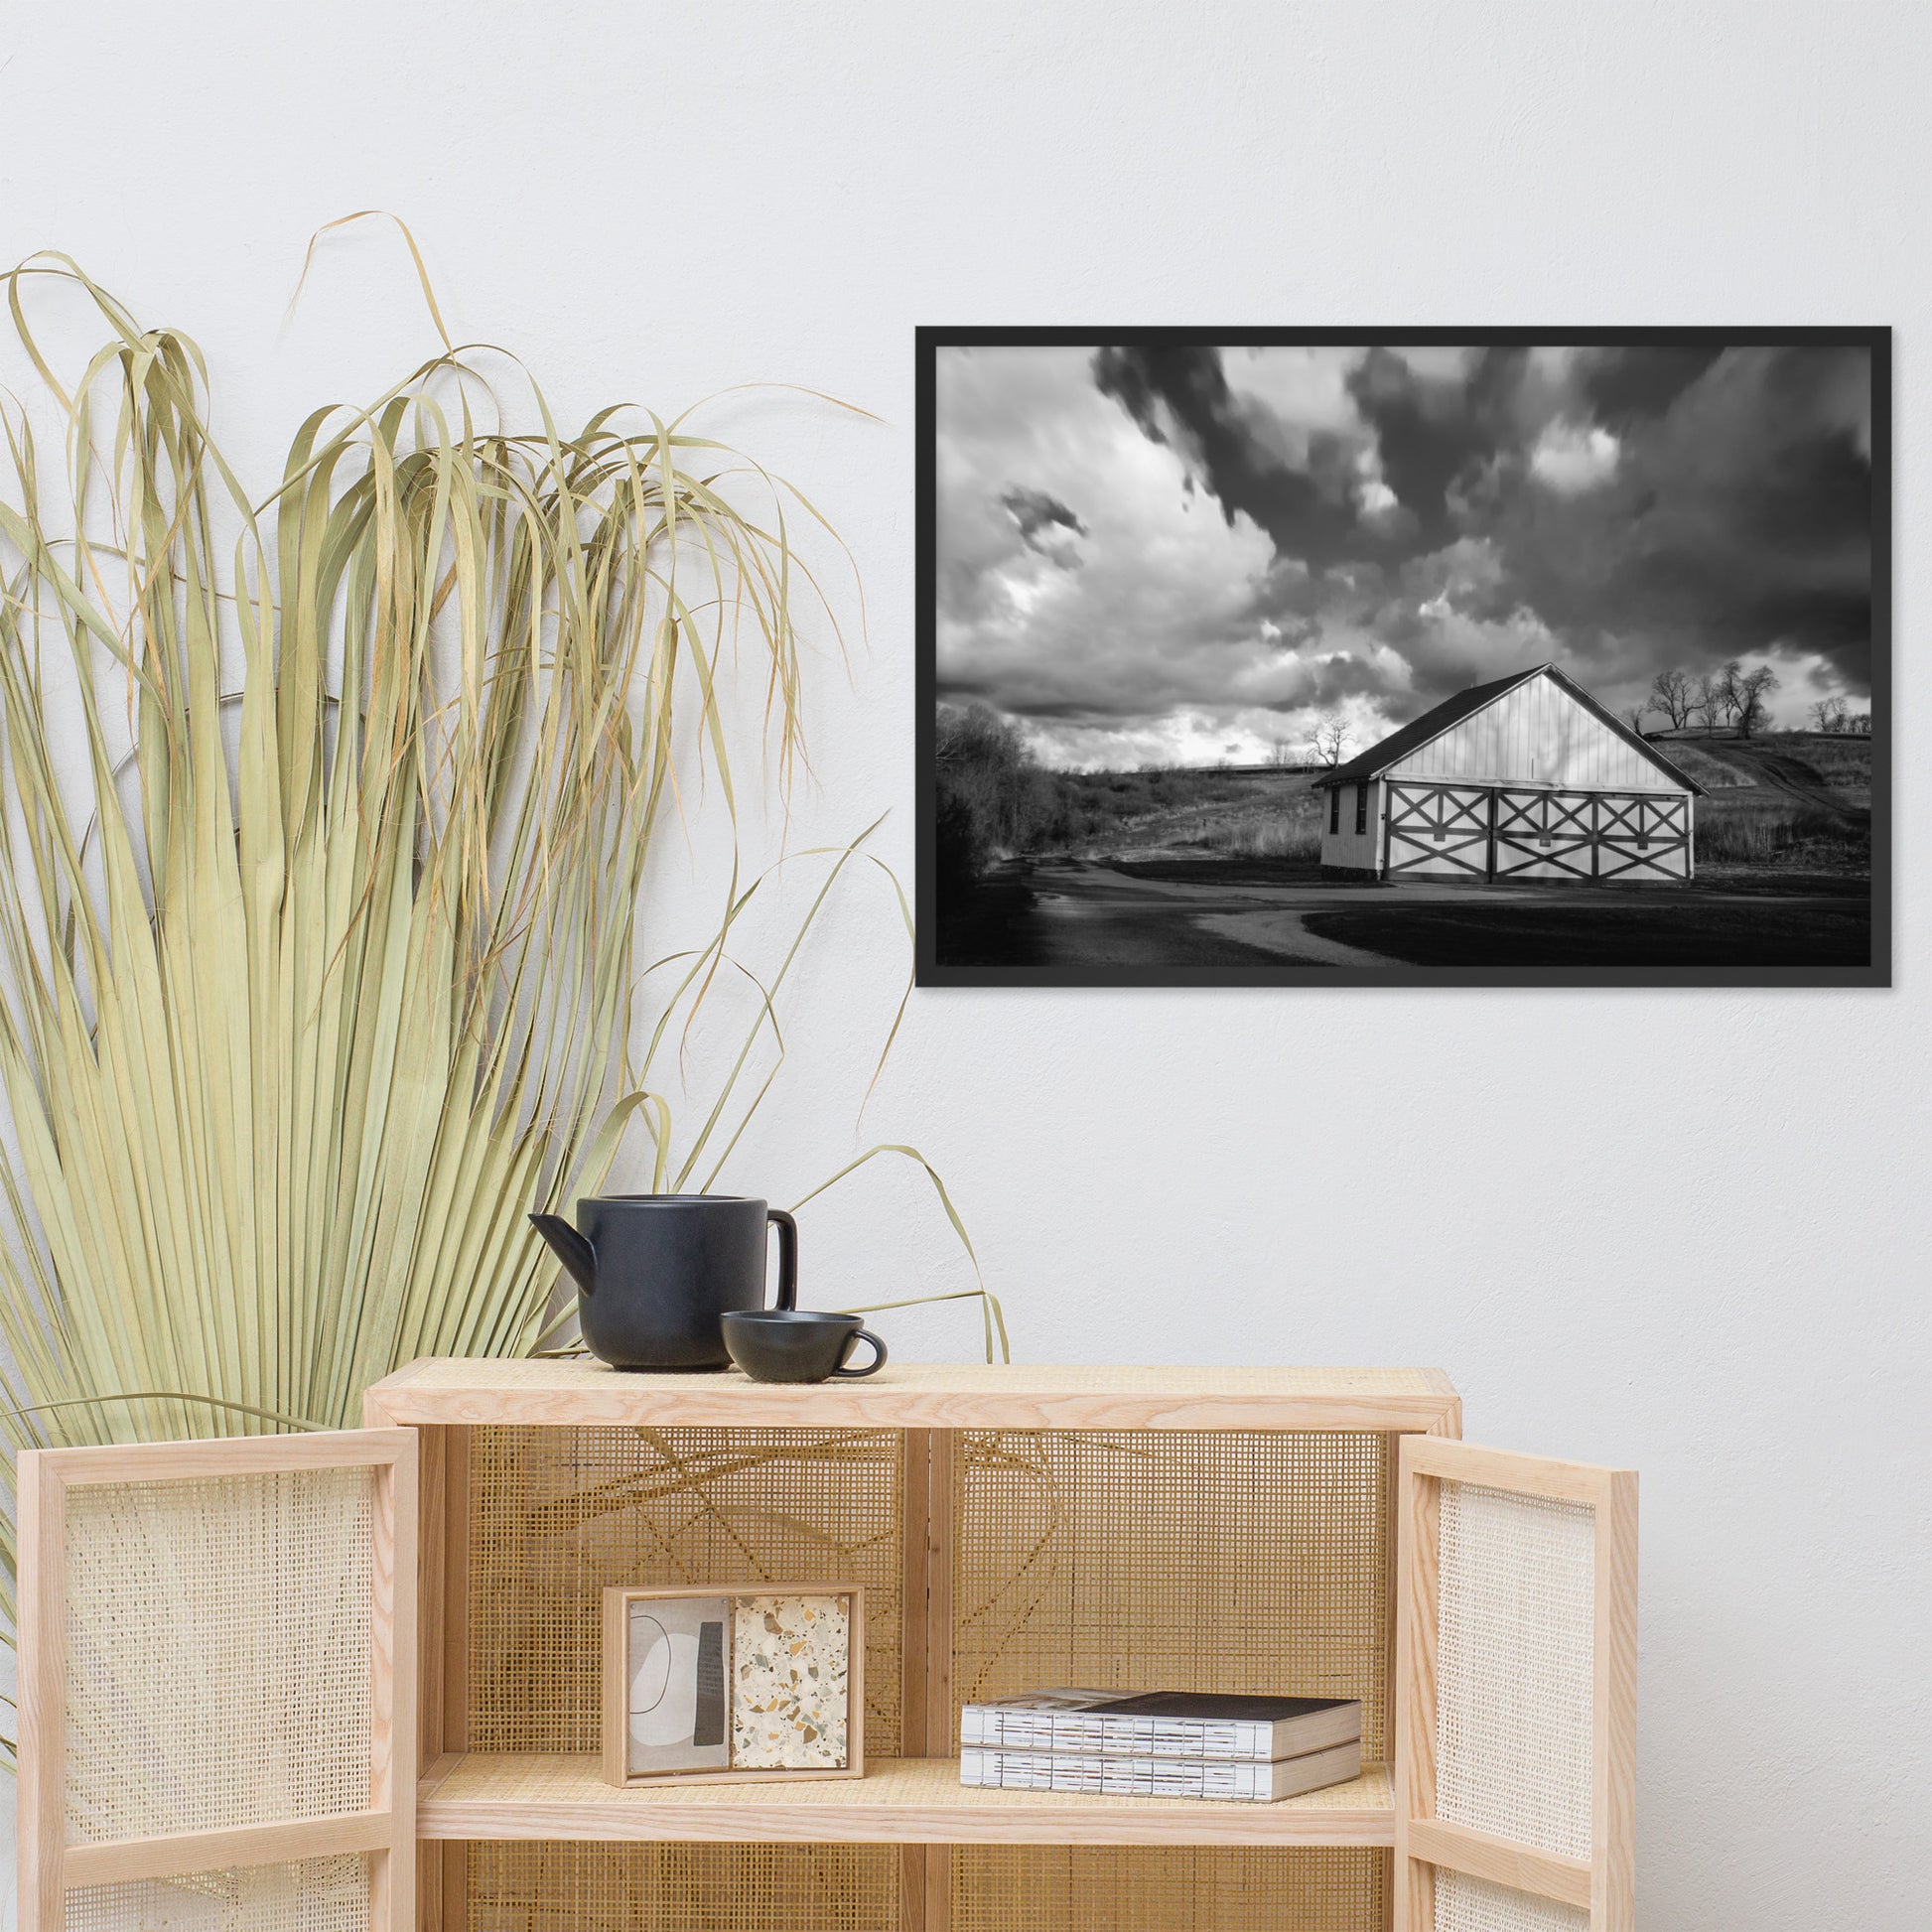 Guest Bedroom Prints: Aging Barn in the Morning Sun in Black and White - Rural / Country Style Landscape / Nature Photograph  Framed Wall Art Print - Wall Decor - Artwork